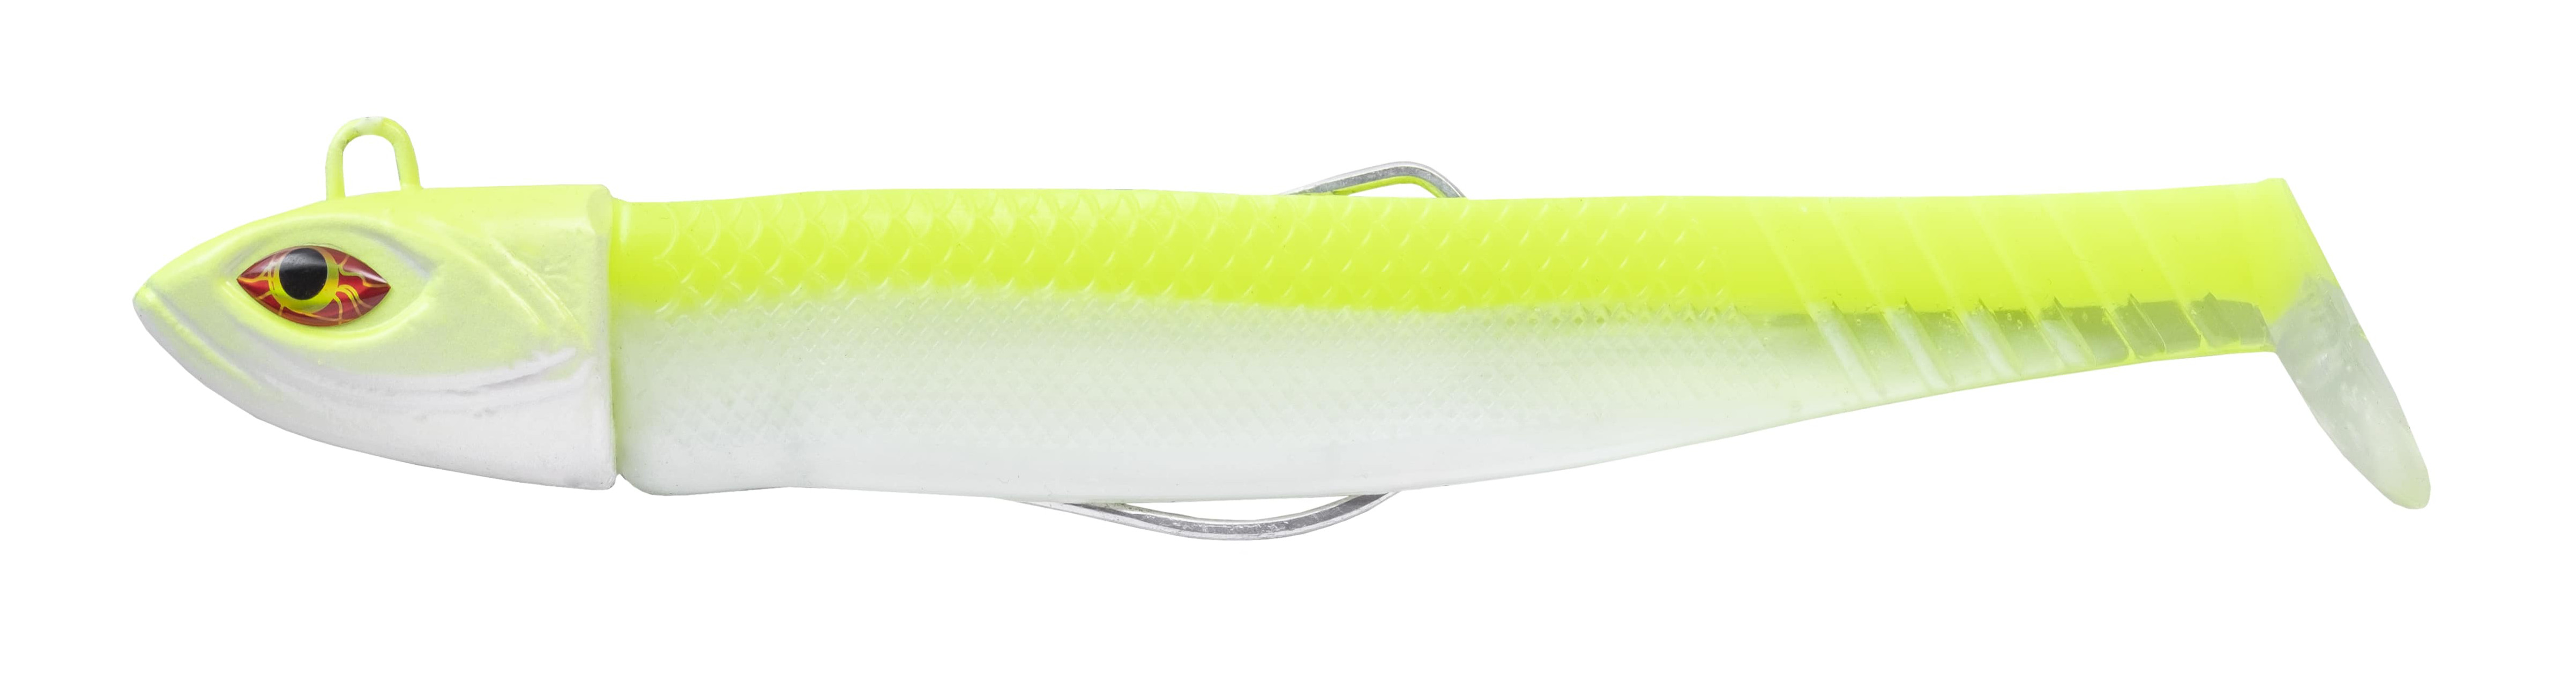 Cinnetic Crafty Candy Shad 17cm (125g) (2 stuks) - White Chartreuse